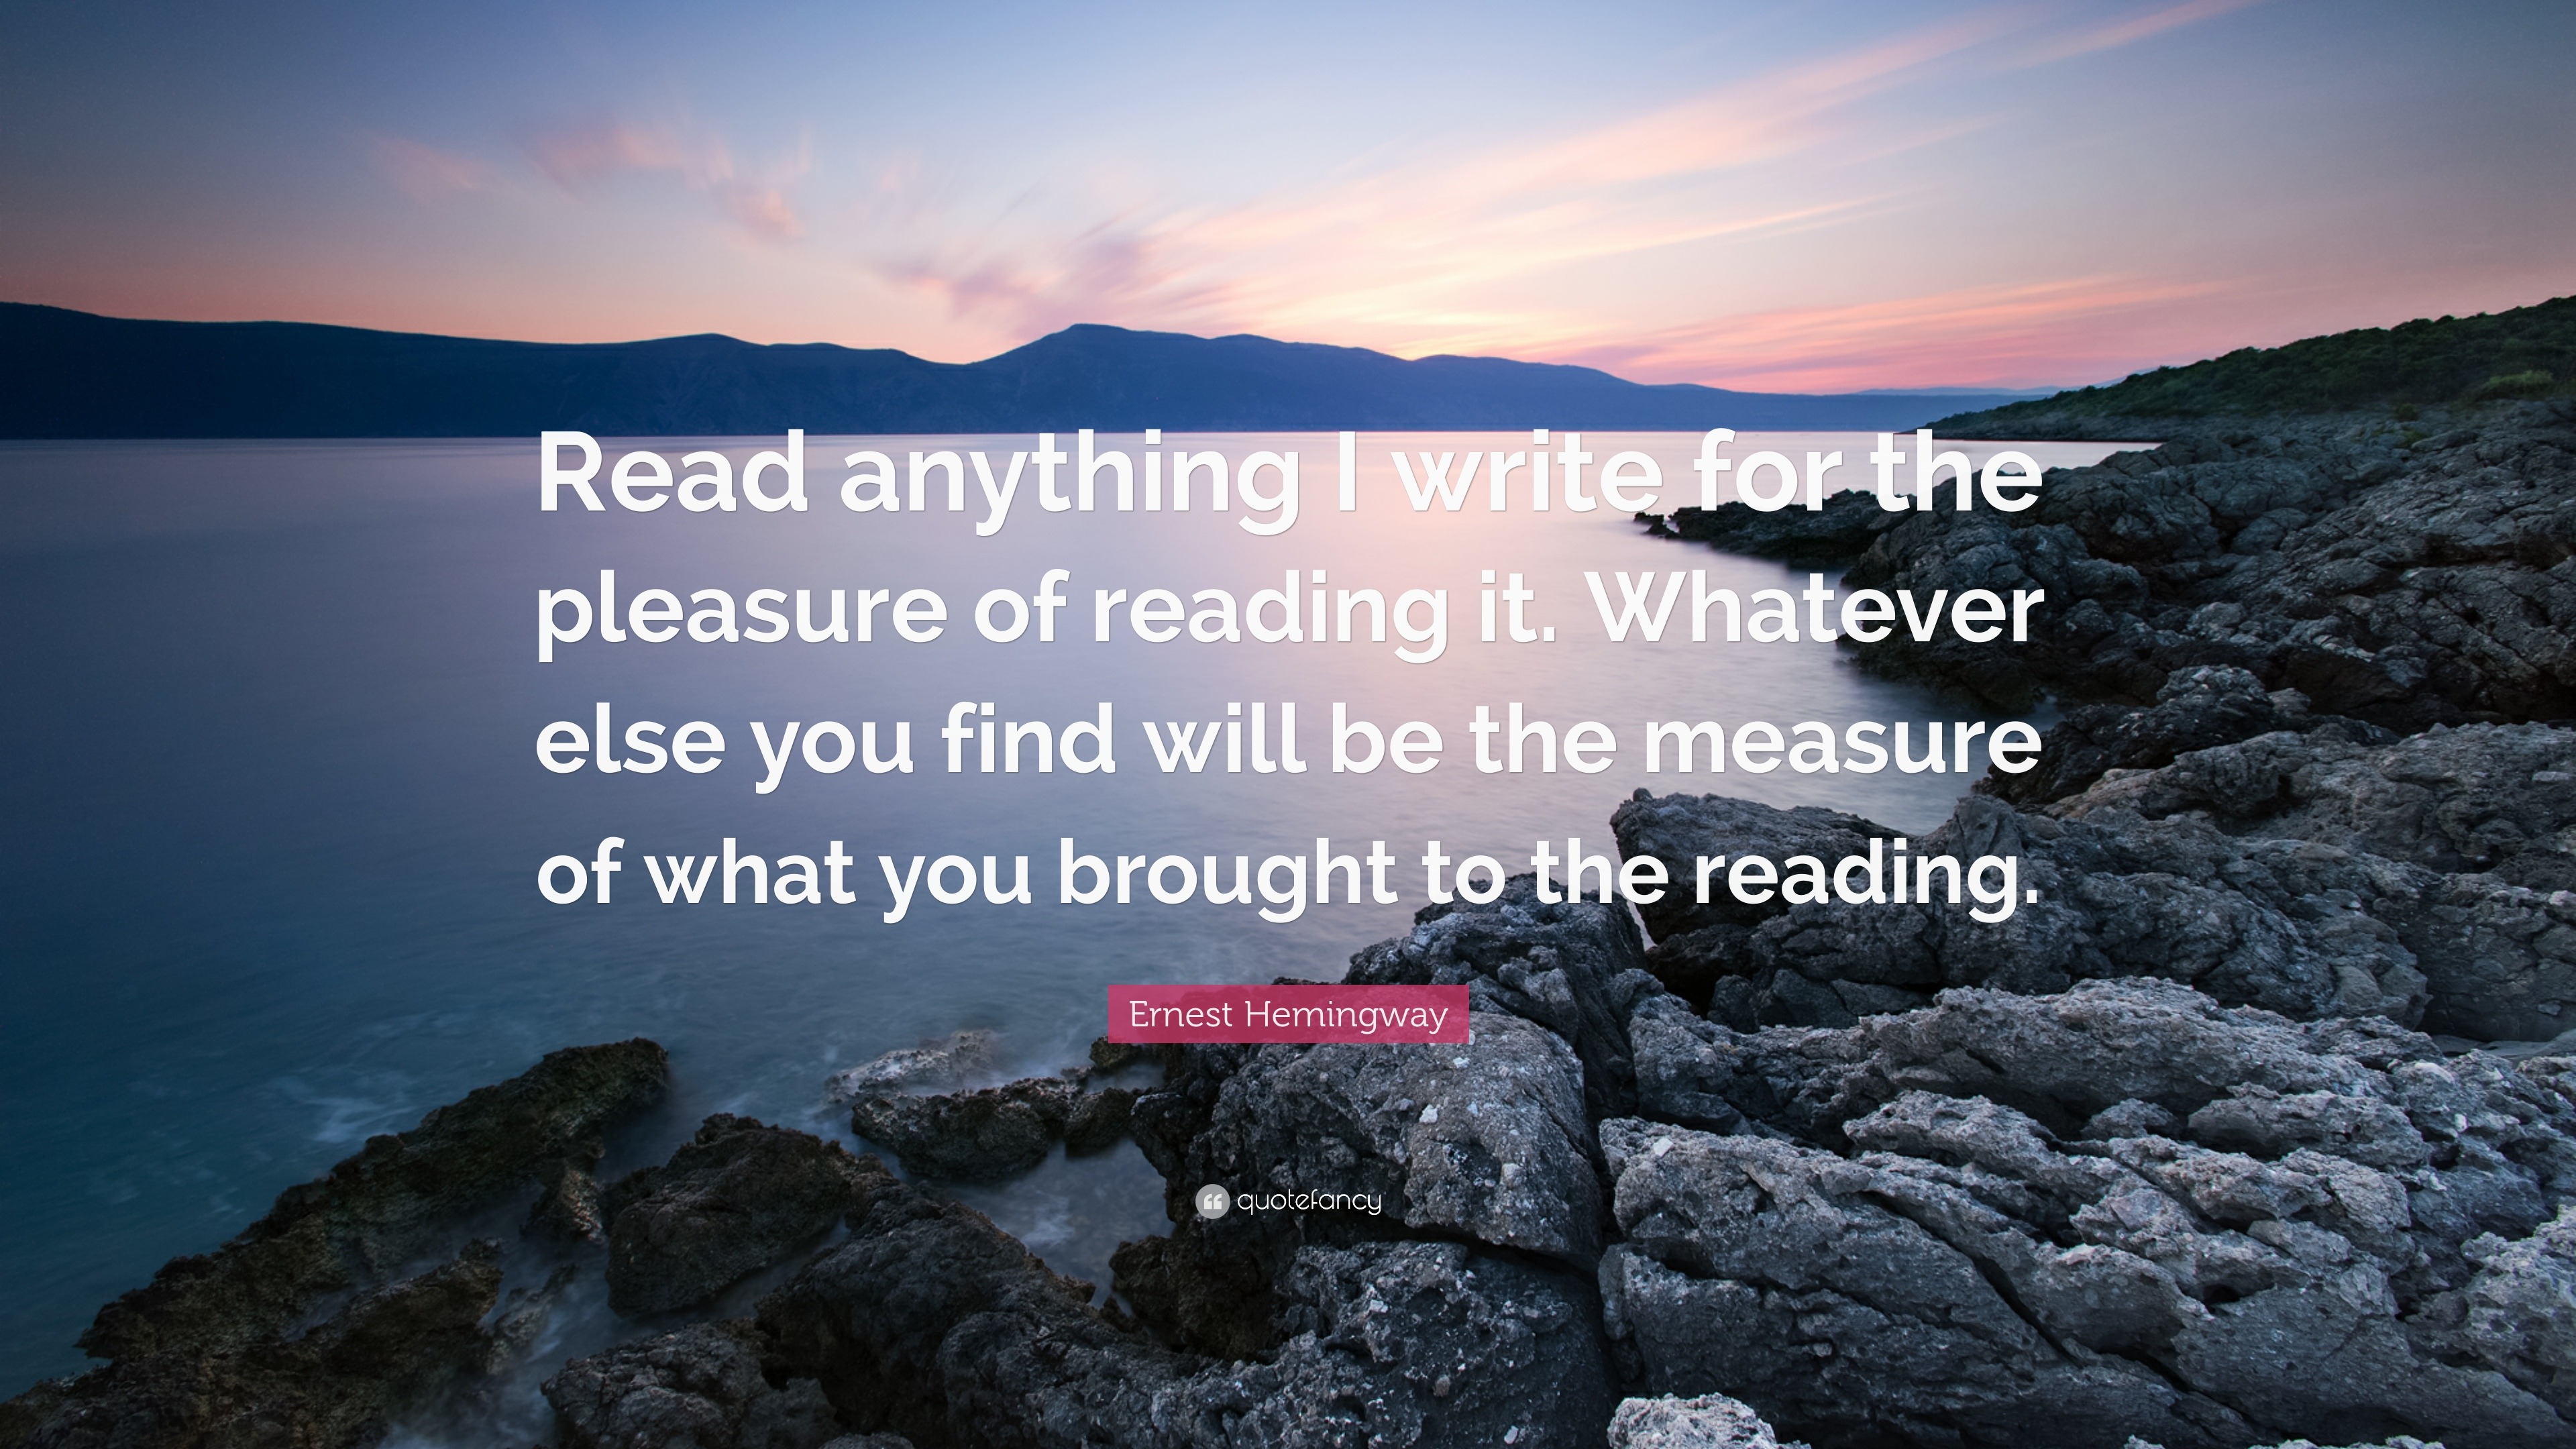 Ernest Hemingway Quote: “Read anything I write for the pleasure of